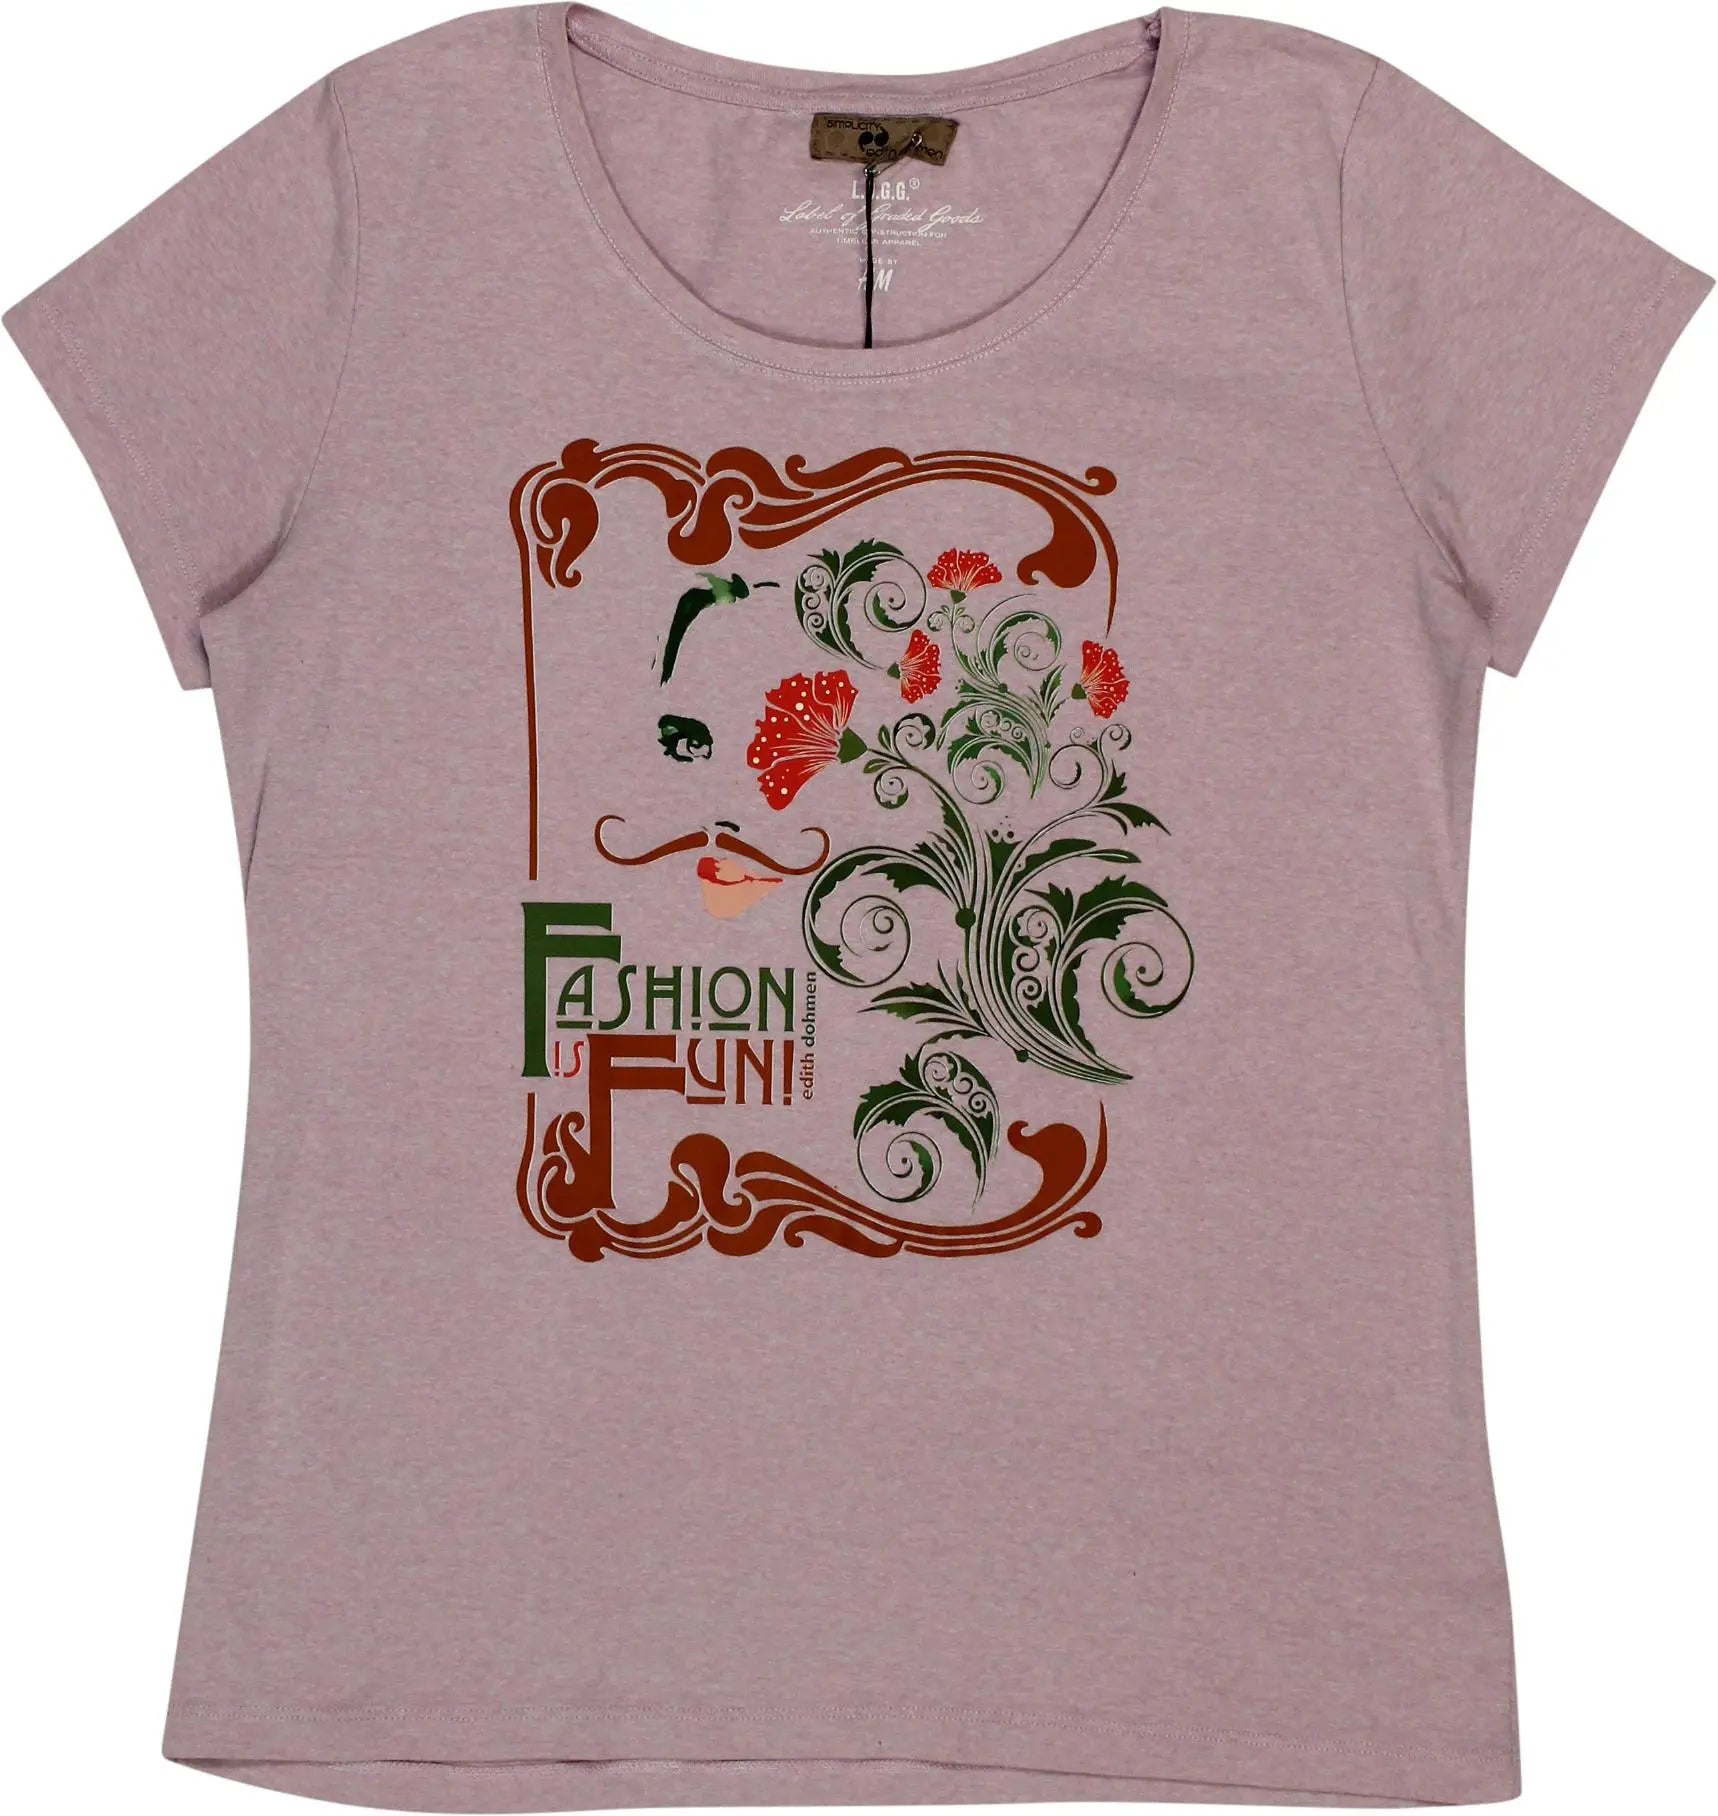 Simplicity - T-Shirt with Print Designed by Edith Dohmen- ThriftTale.com - Vintage and second handclothing